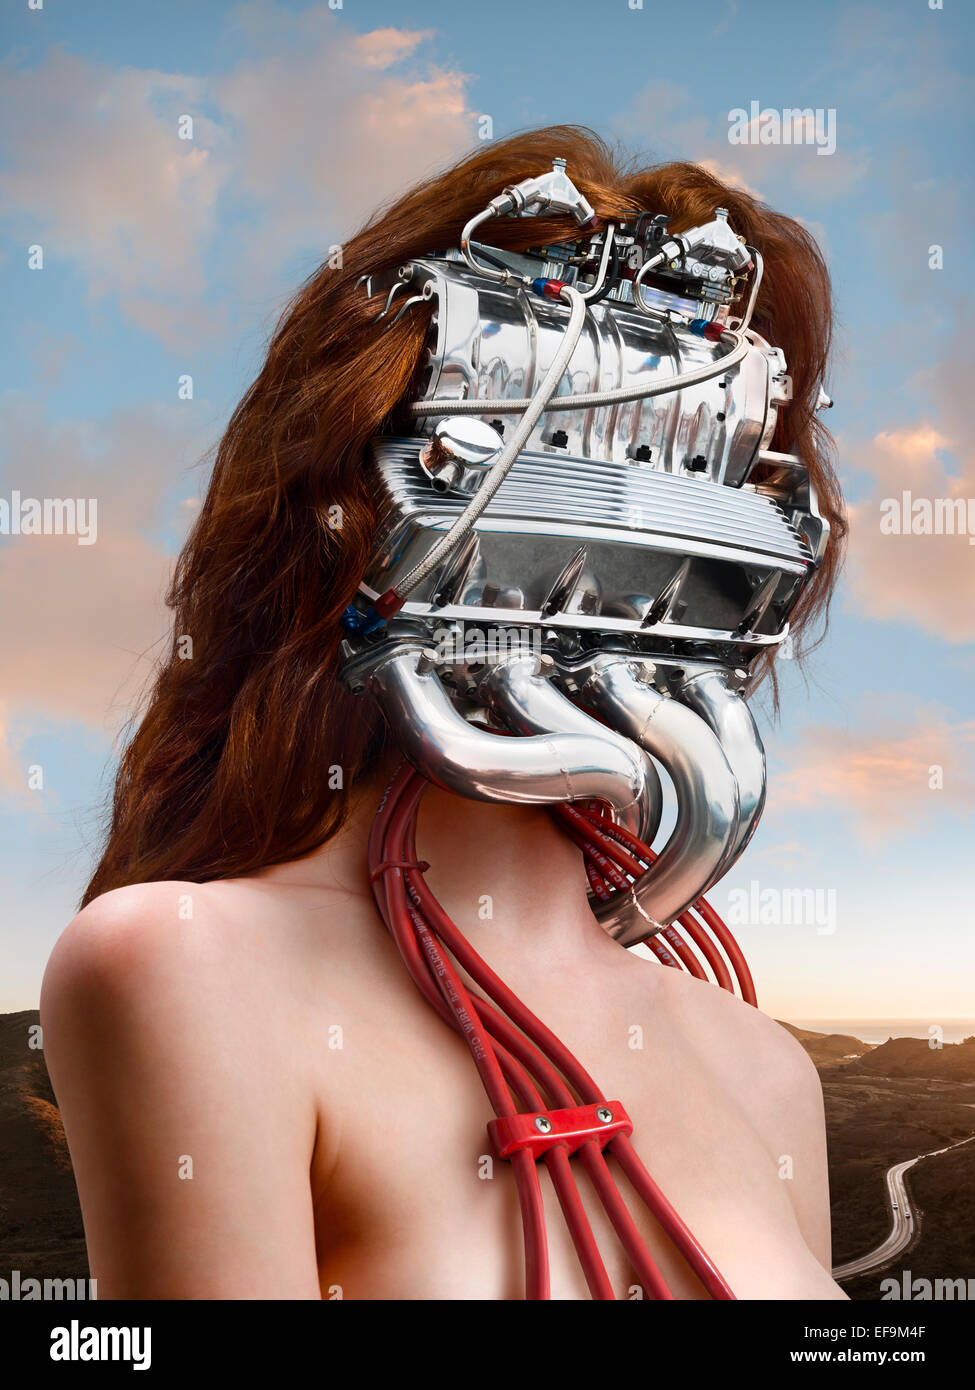 Fantasy image of woman with a car engine for a head with a sunset lit landscape behind her Stock Photo